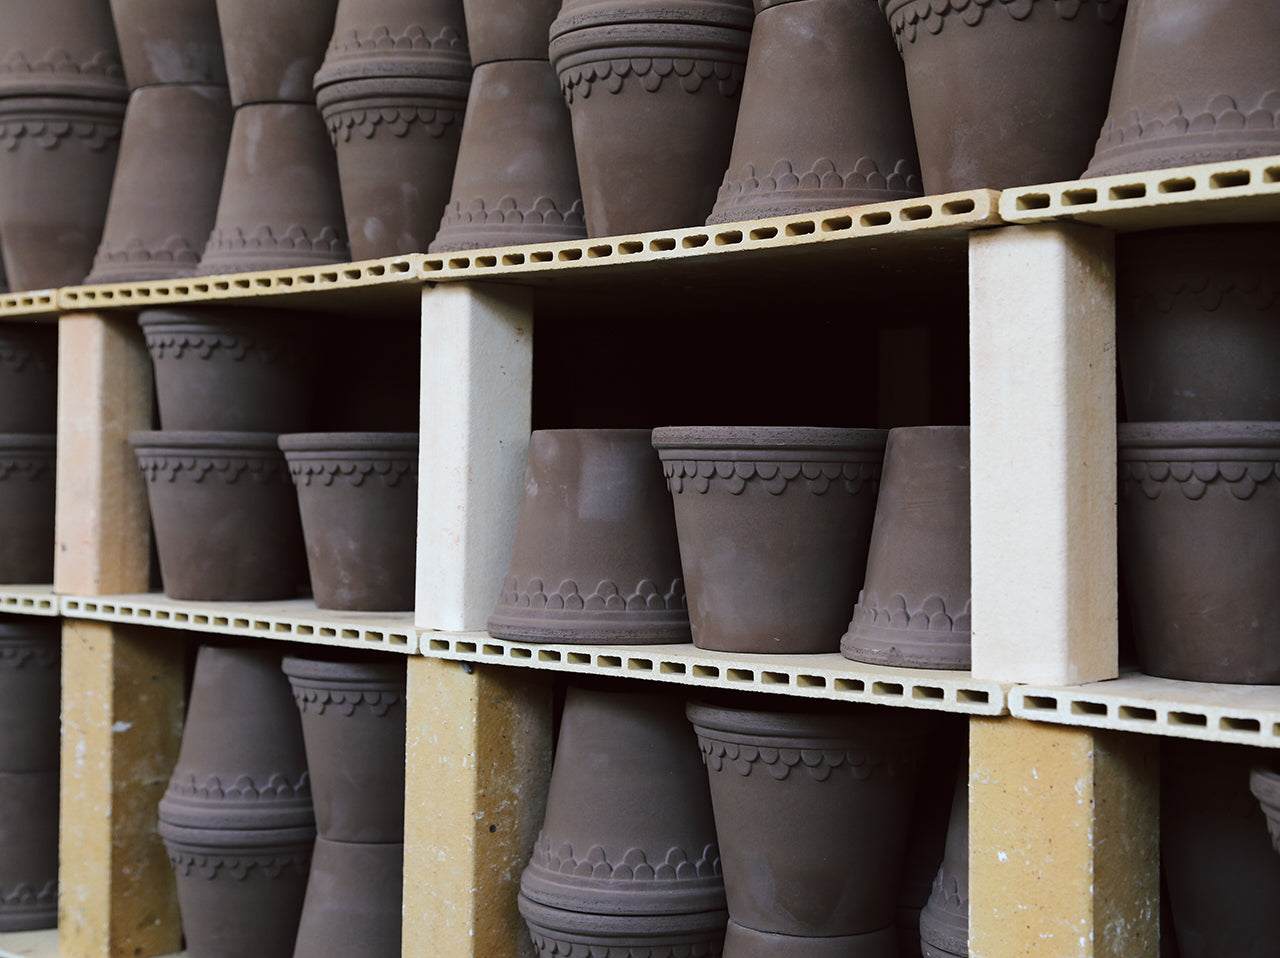 Pots in the workshop